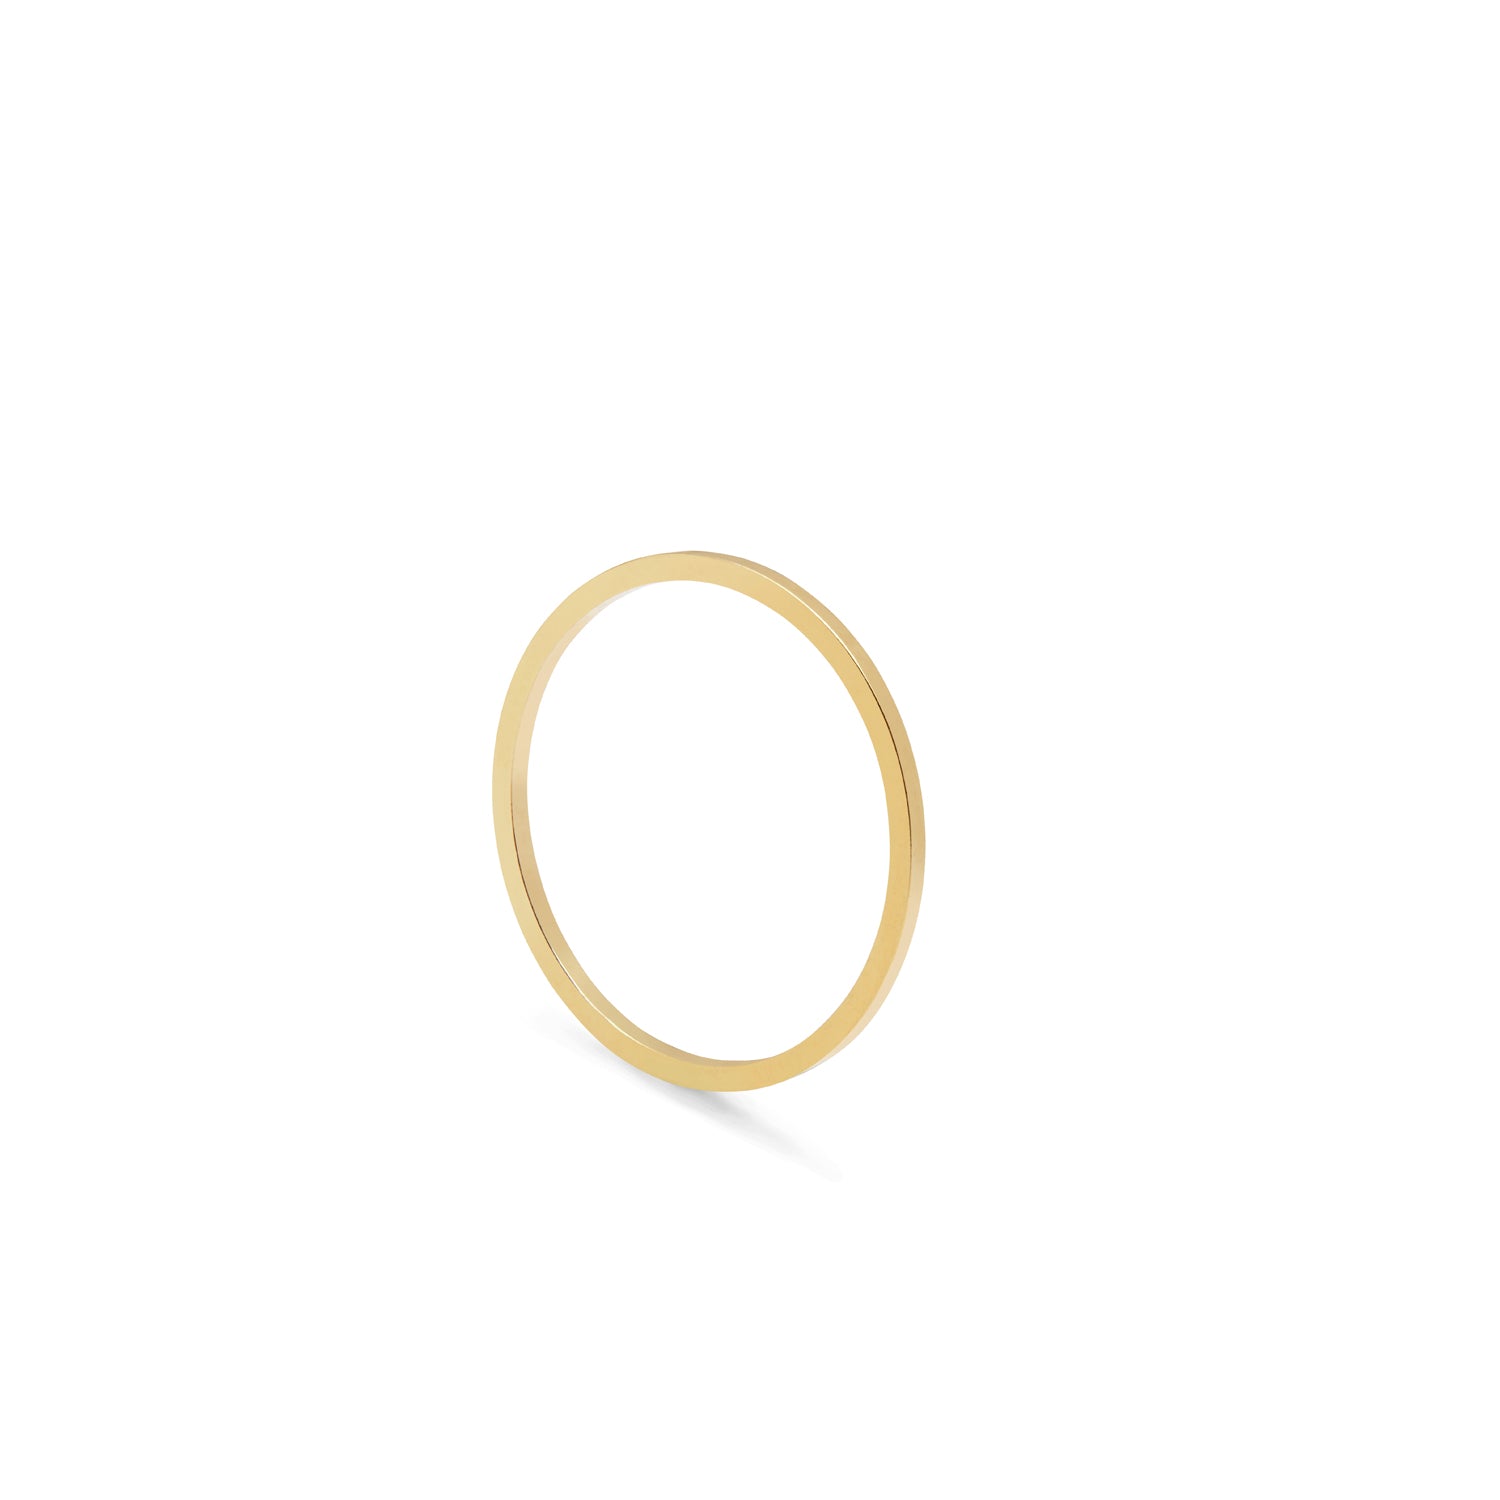 Ultra Skinny Square Stacking Ring - Gold - Myia Bonner Jewellery